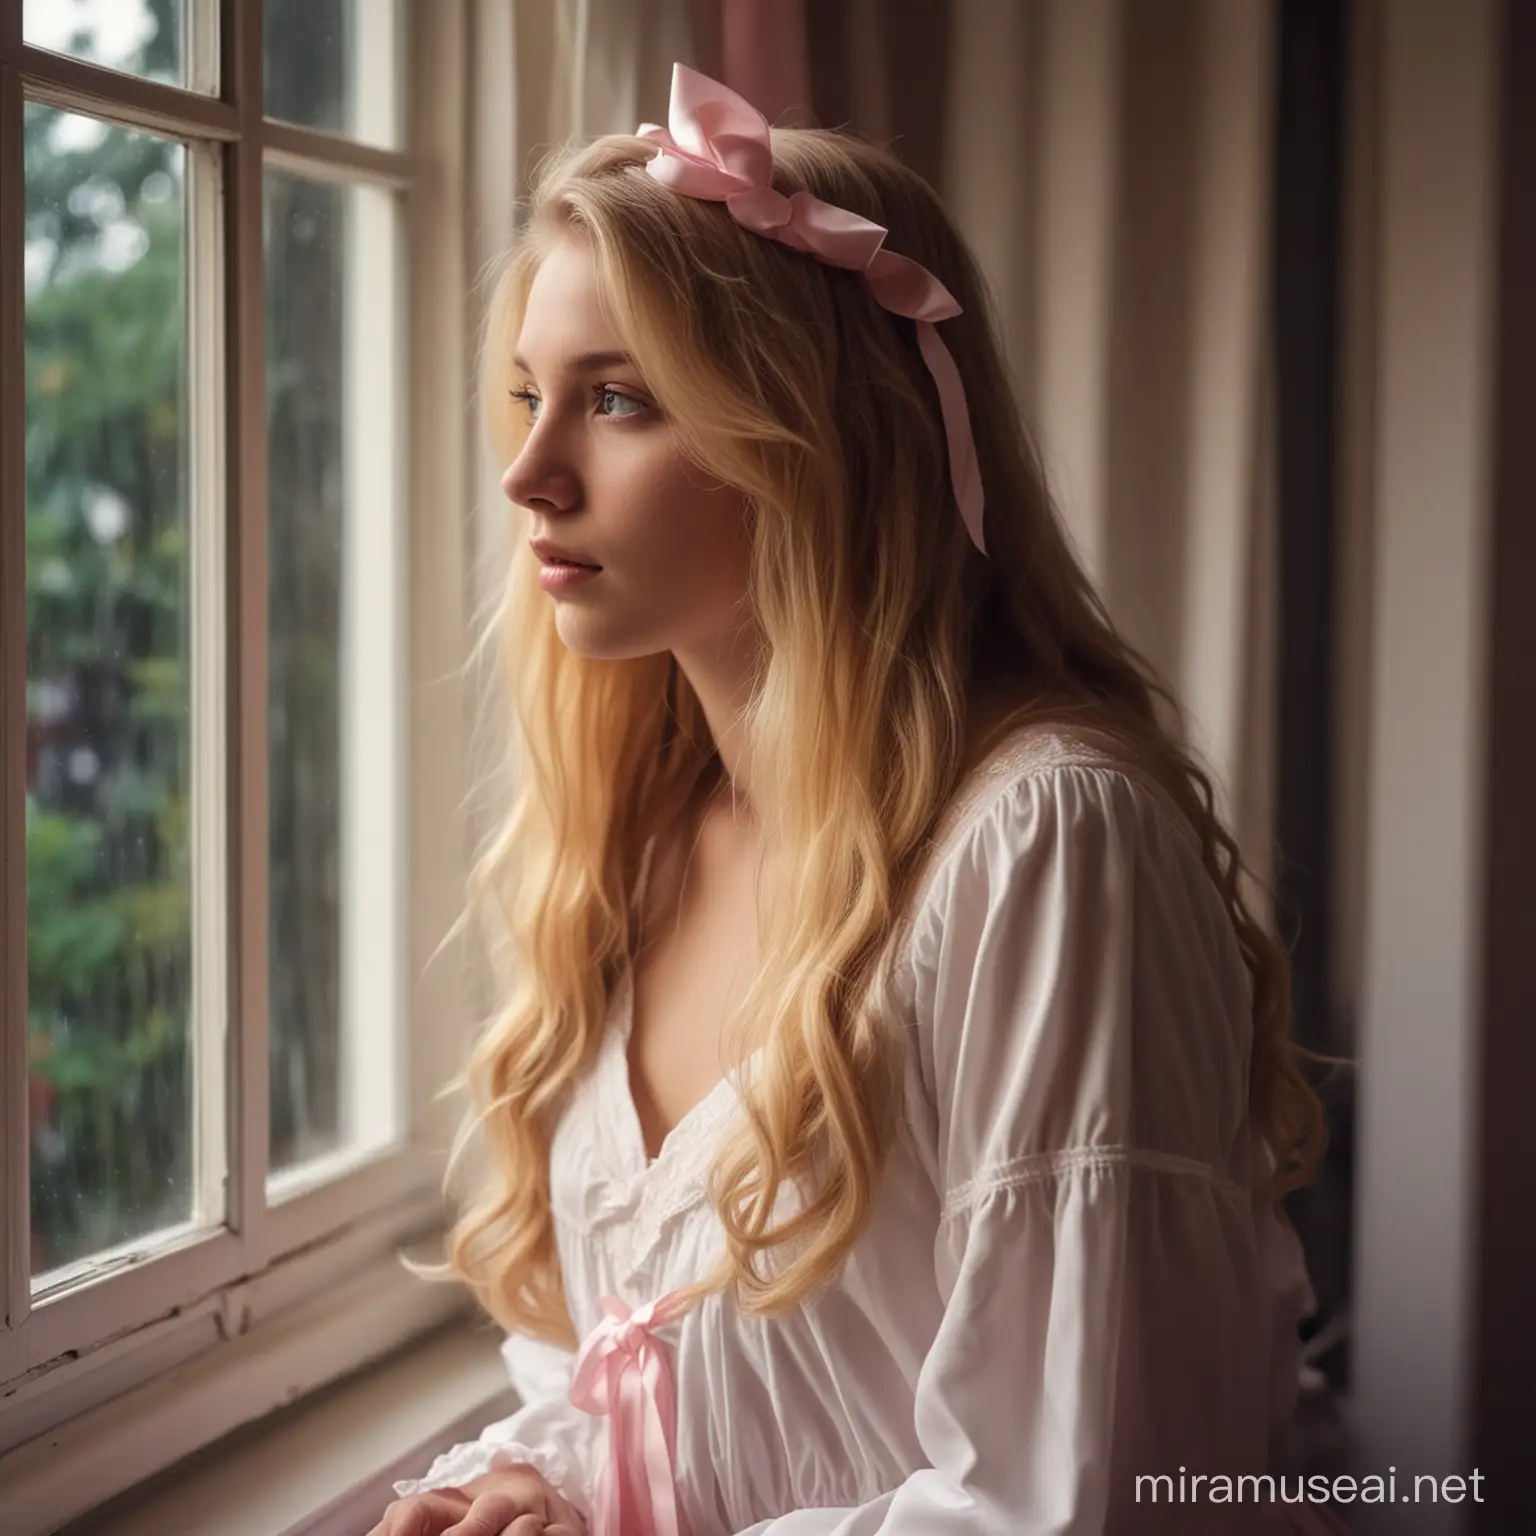 teenage girl staring outside her windowsill, in a luxurious vintage-style house, at night, thinking of her crush, she is 18 years old, long blonde hair, with pale pink ribbons, she is wearing a white night gown, somewhat lonely expression on her face